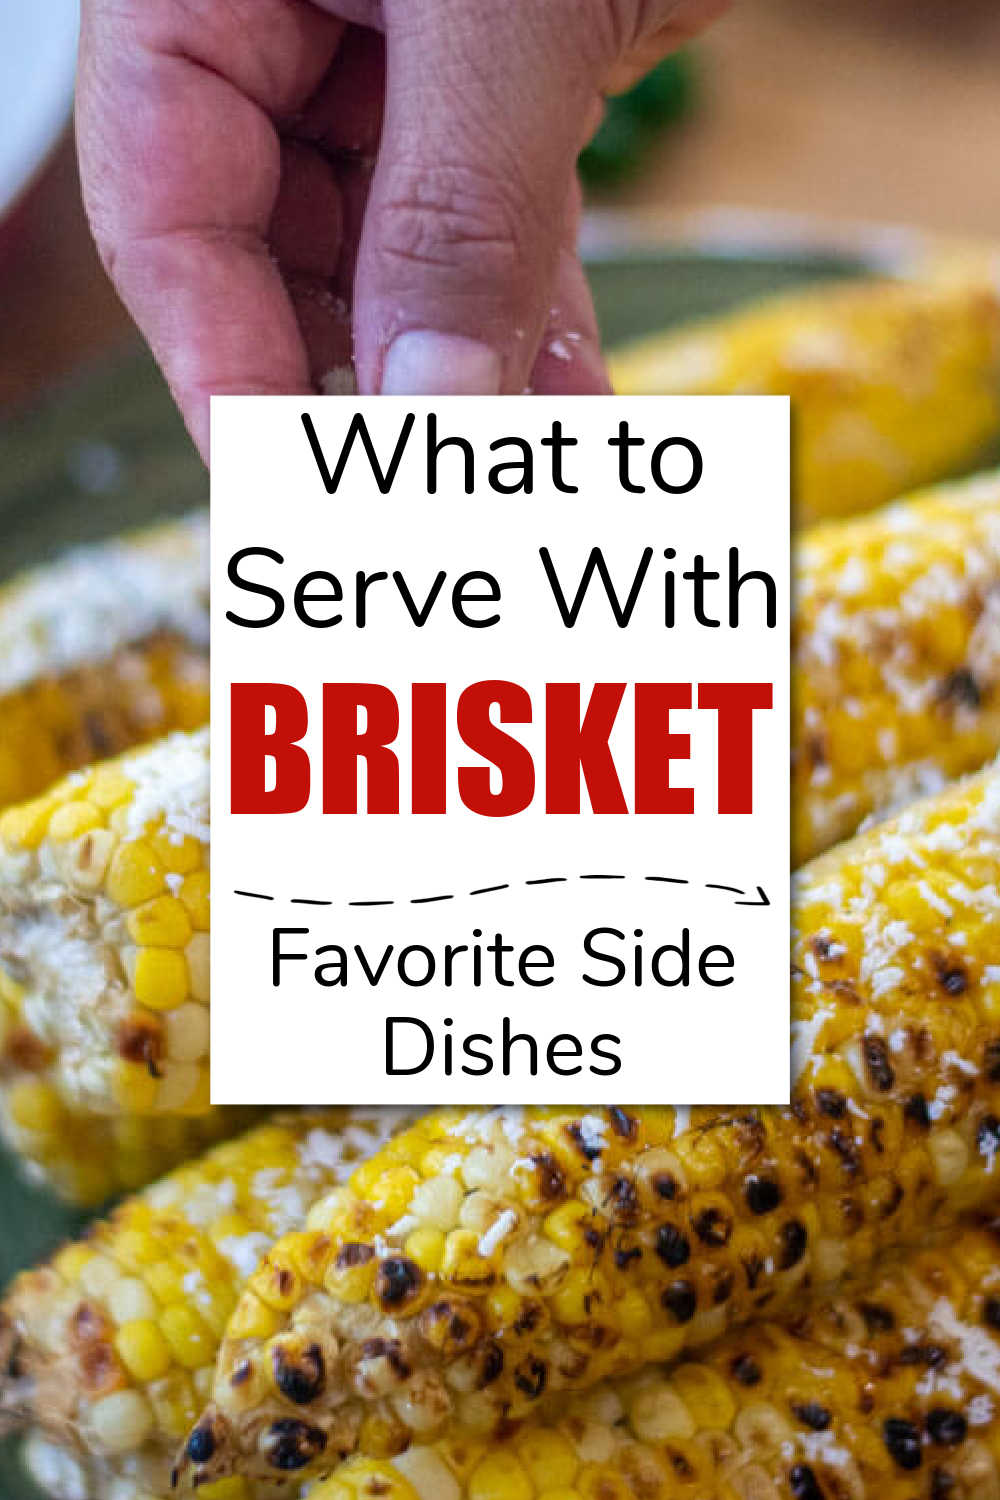 What To Serve With Brisket - 15 Best Recipes